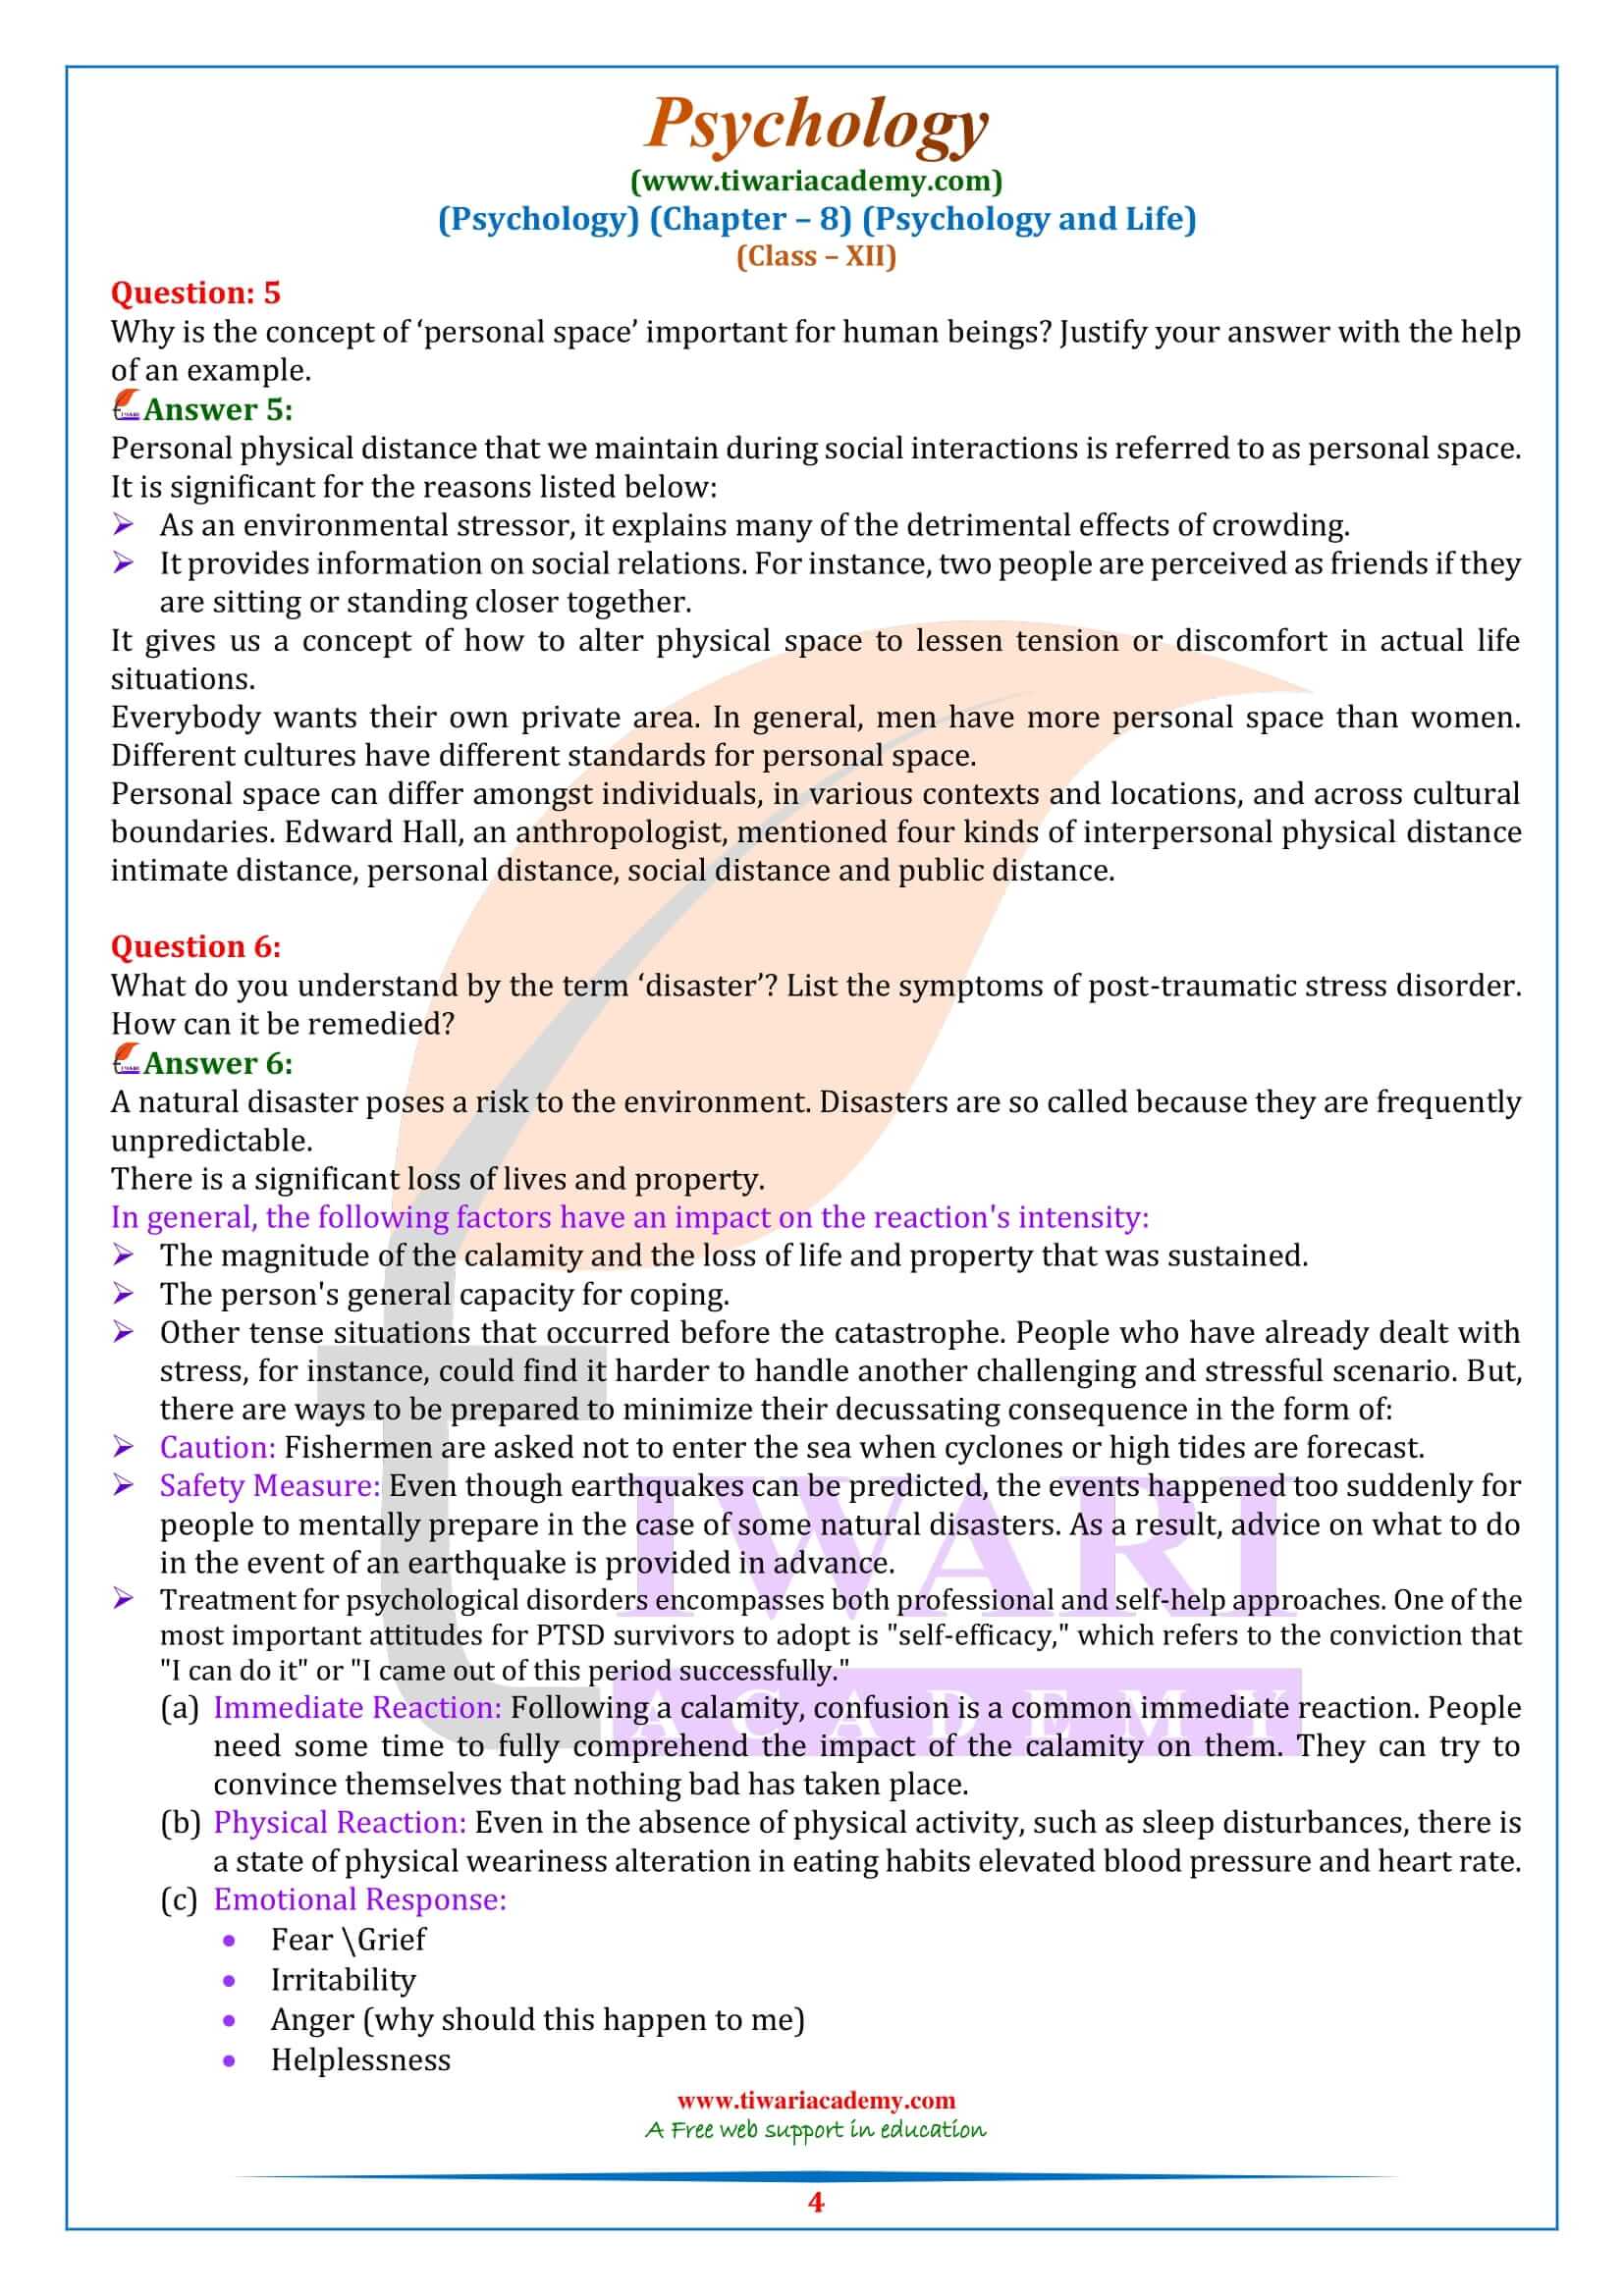 NCERT Solutions for Class 12 Psychology Chapter 8 in English Medium